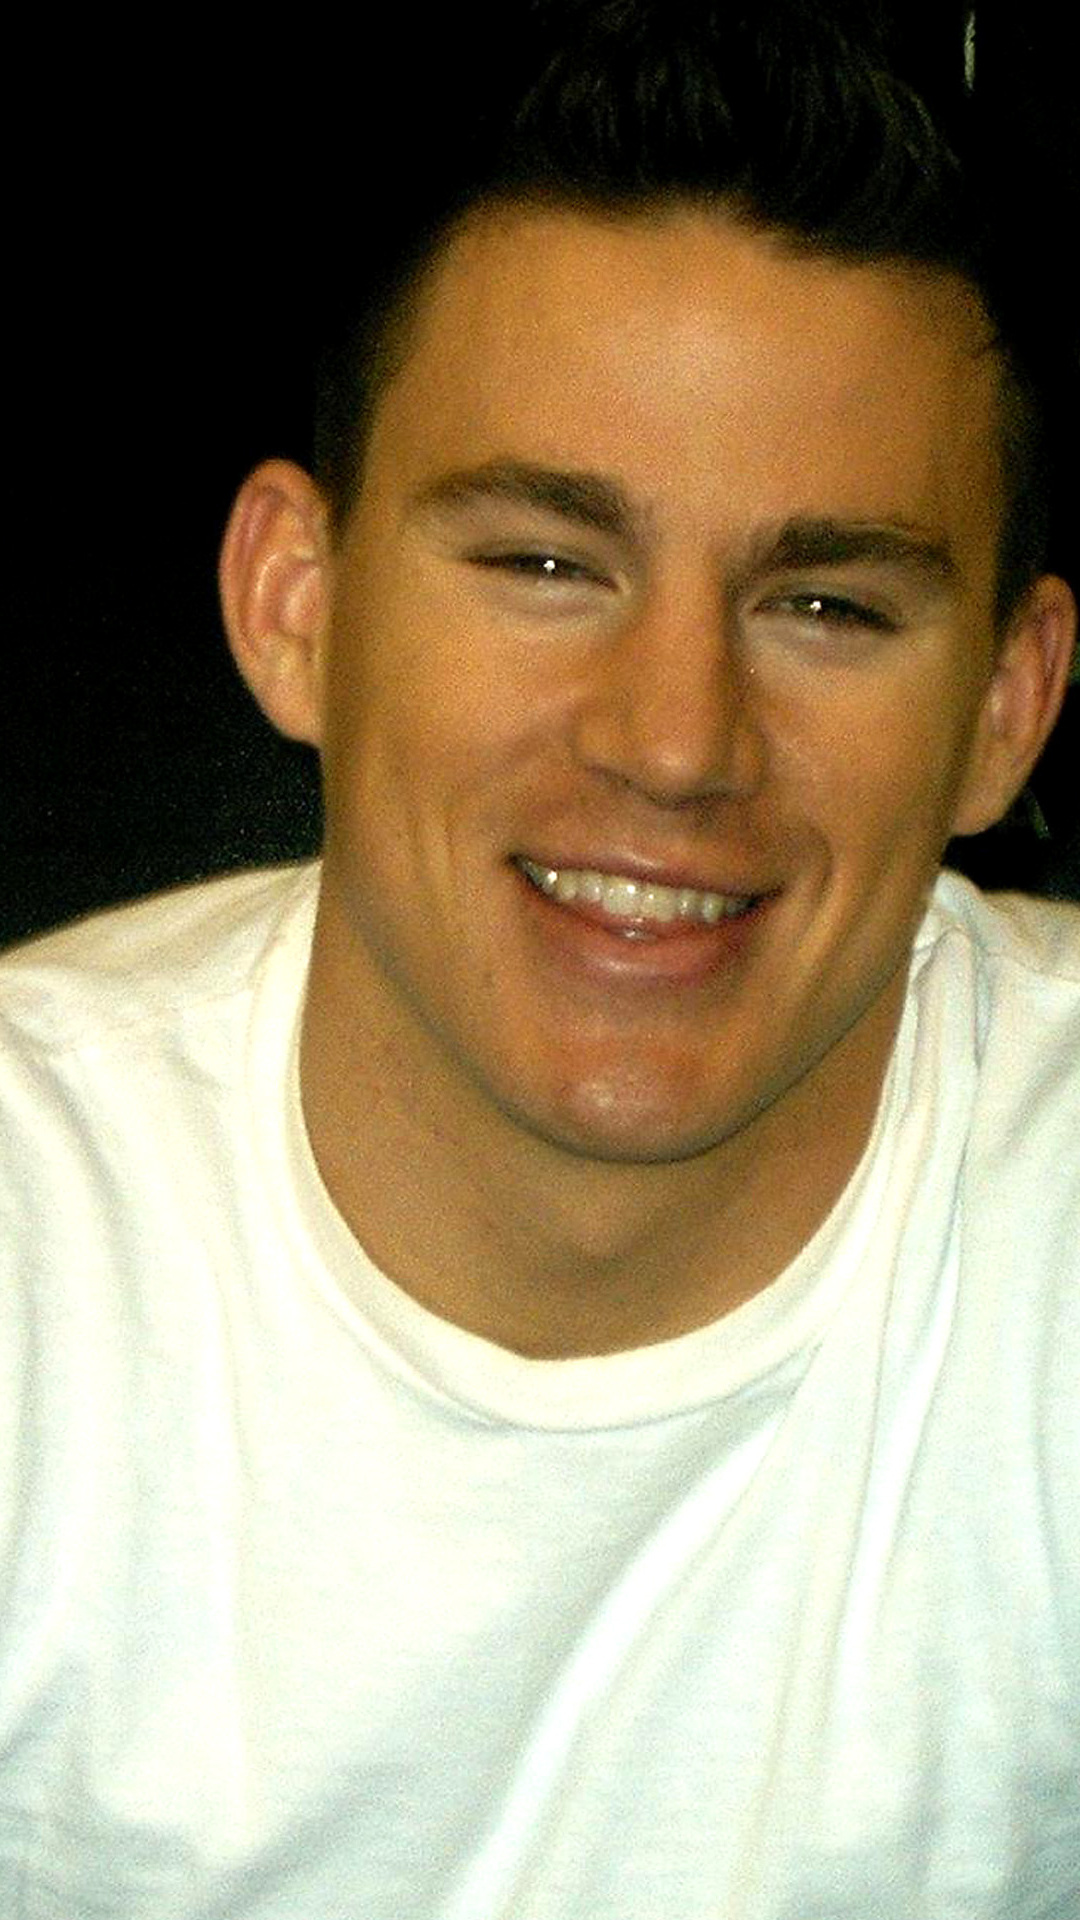 Channing Tatum: Starred as Marcus Flavius Aquila in a 2011 epic historical drama film, The Eagle. 1080x1920 Full HD Wallpaper.